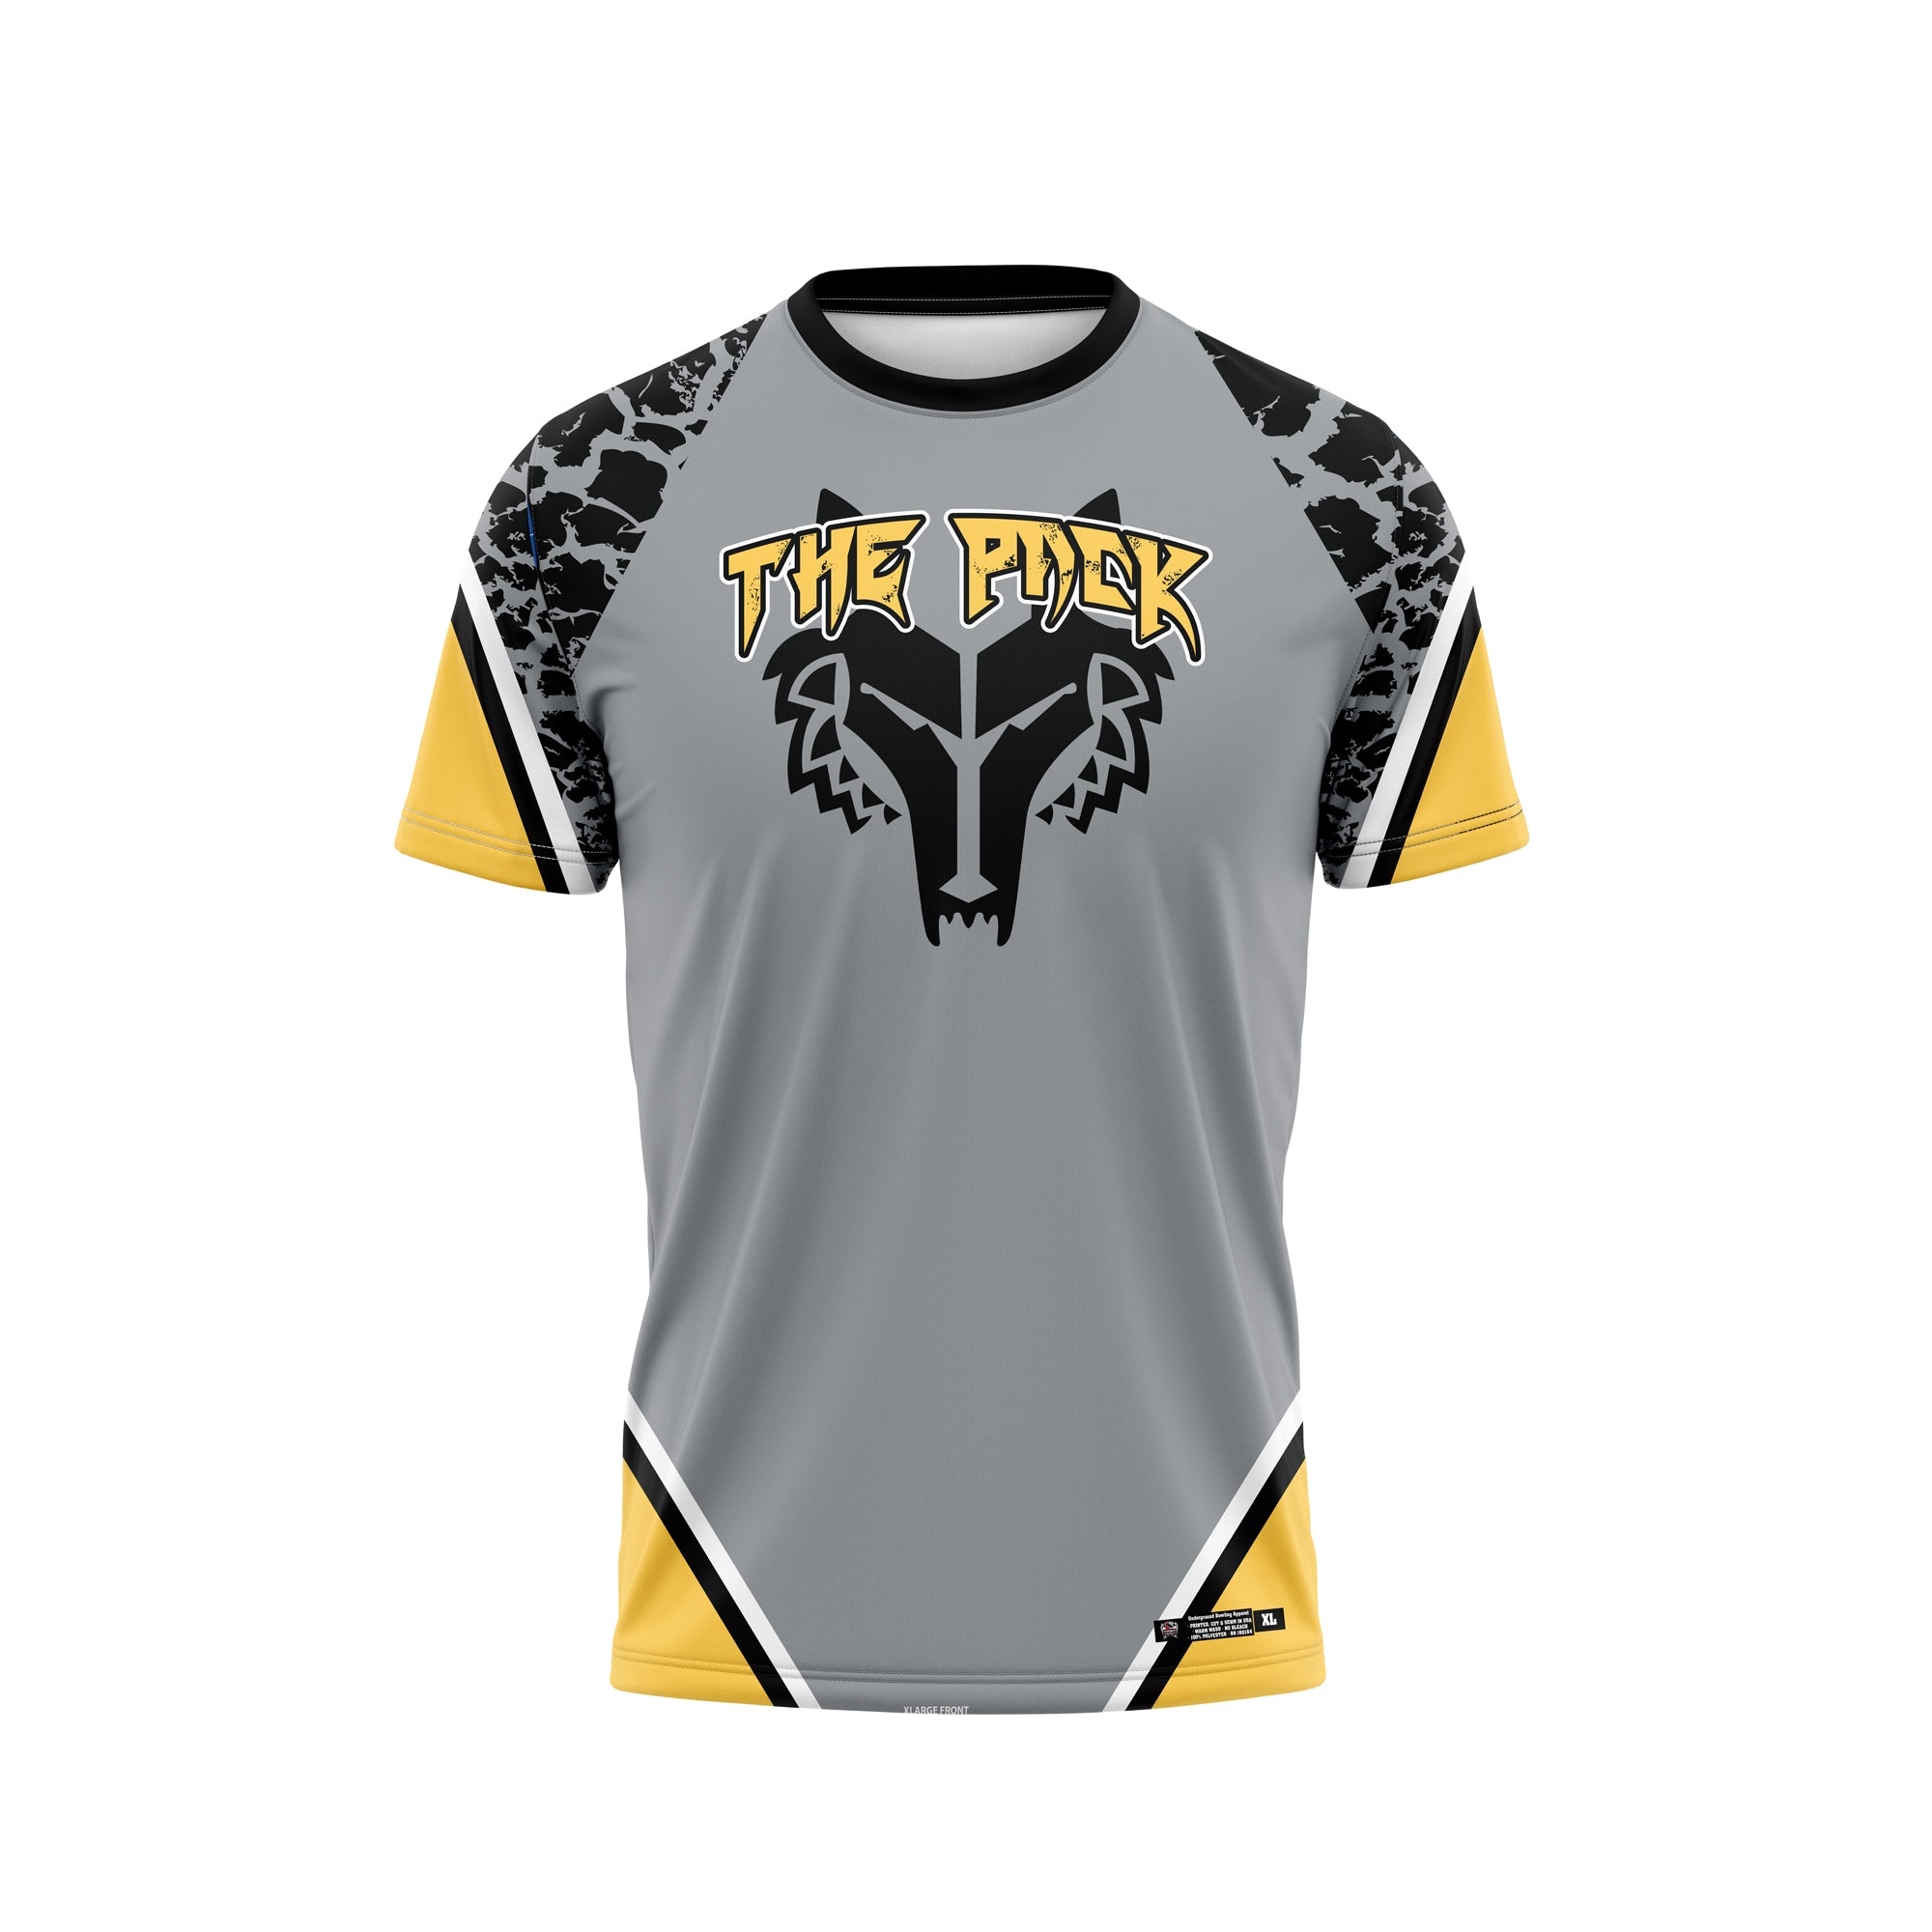 The Pack Grey Jersey